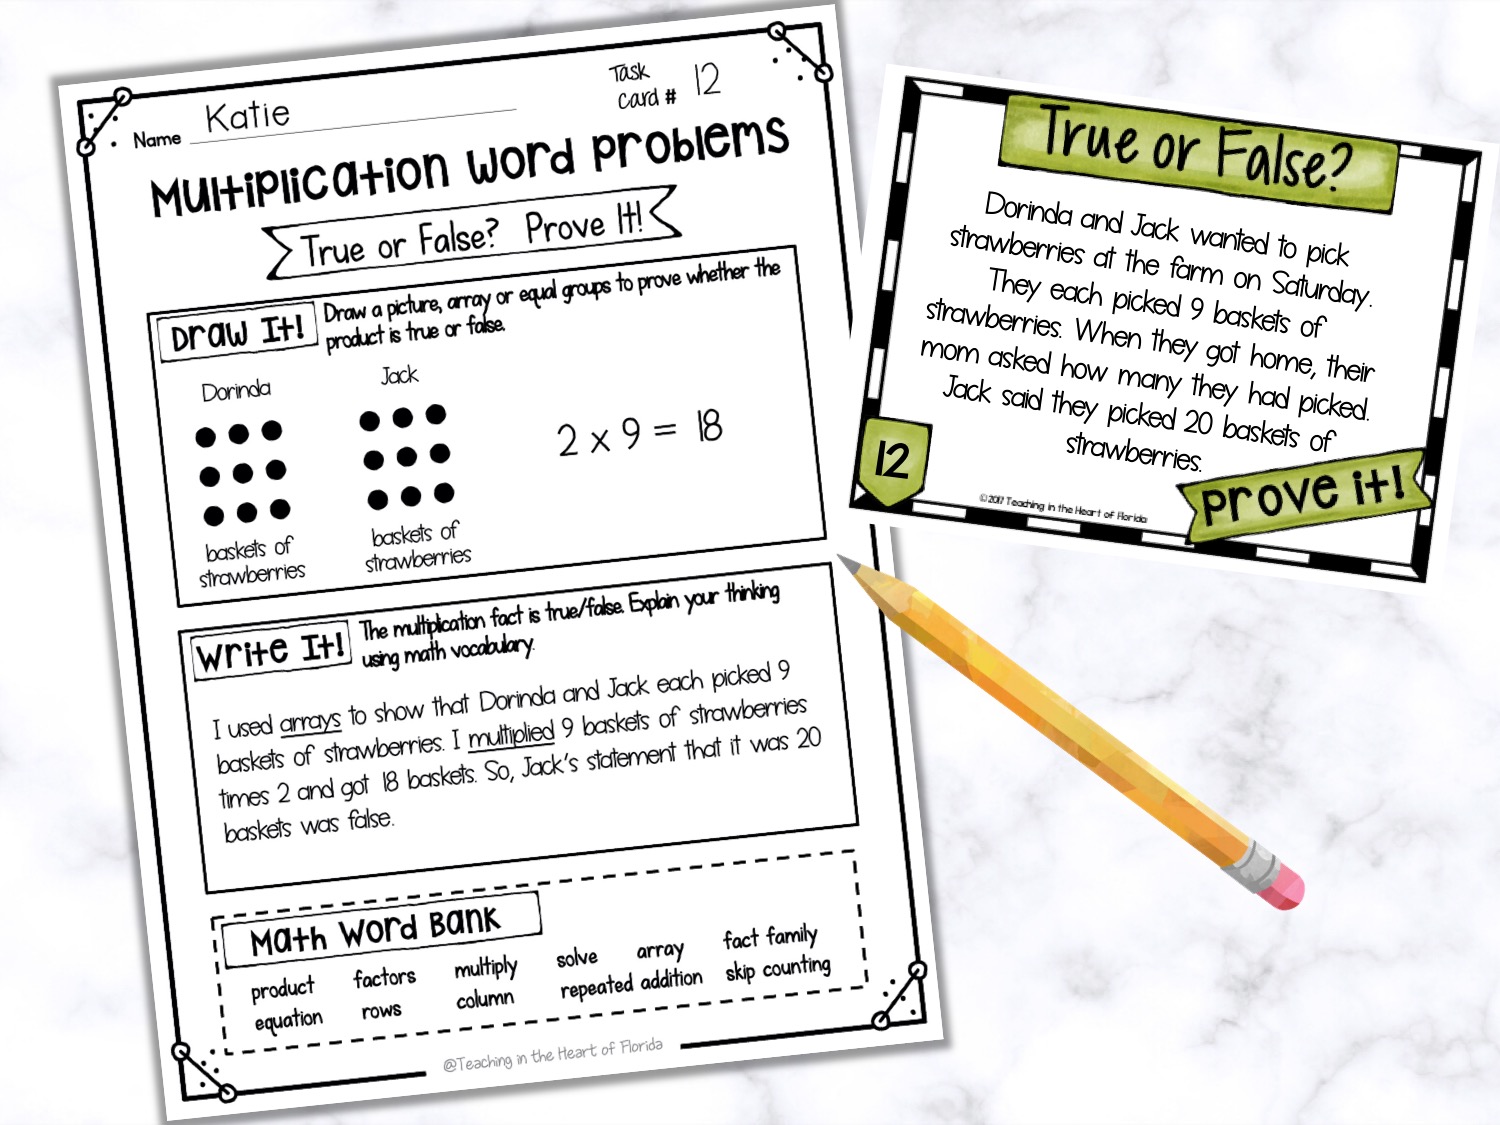 learning-how-to-solve-multiplication-word-problems-is-more-fun-with